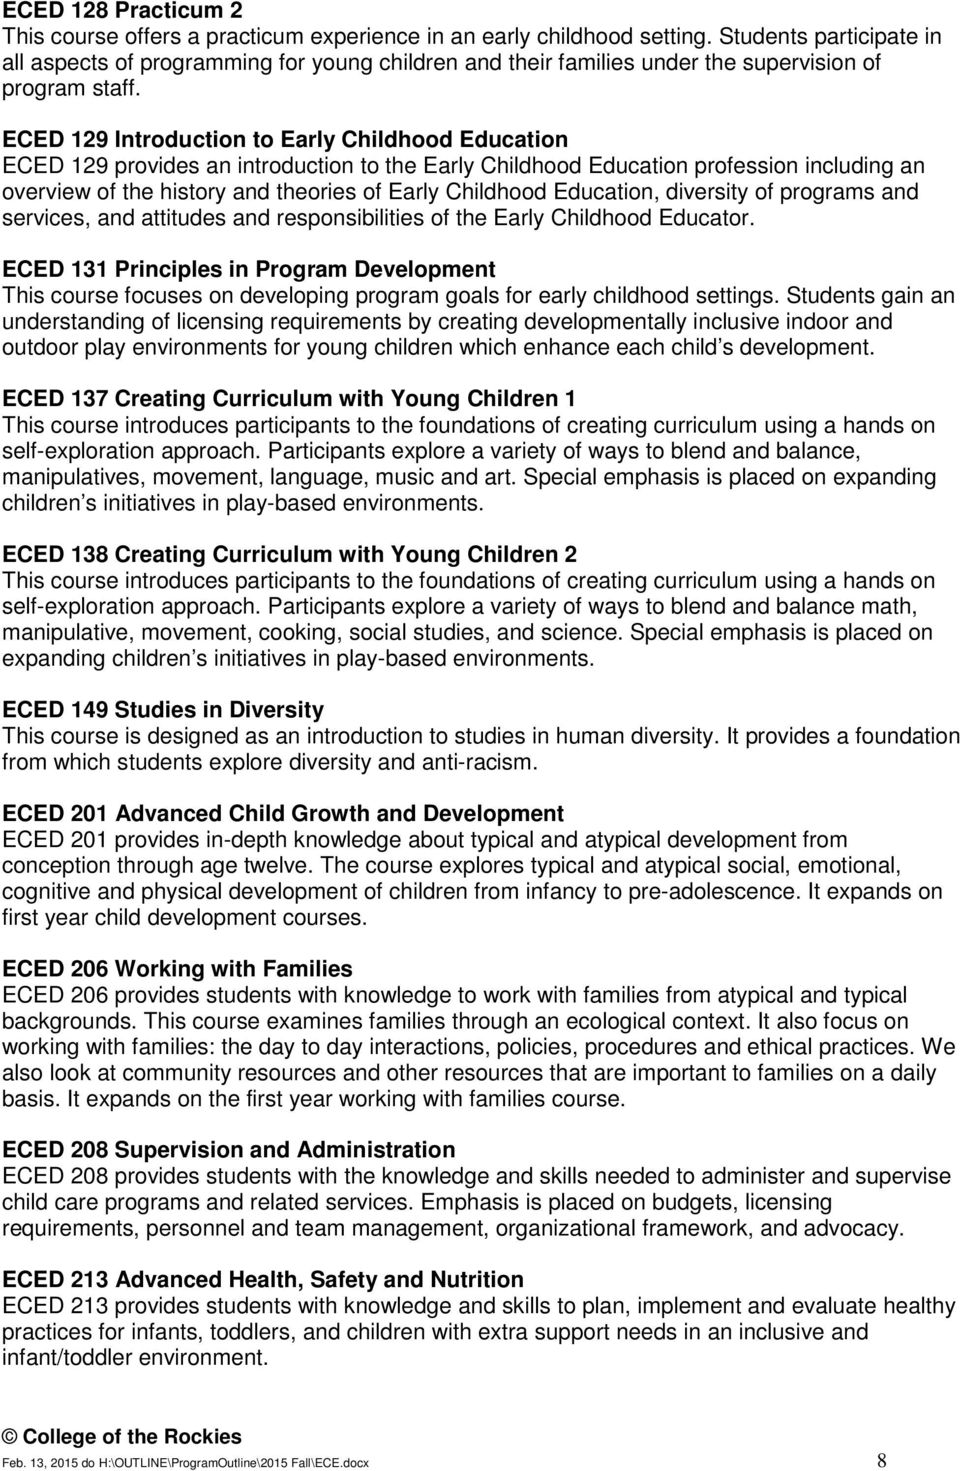 ECED 129 Introduction to Early Childhood Education ECED 129 provides an introduction to the Early Childhood Education profession including an overview of the history and theories of Early Childhood